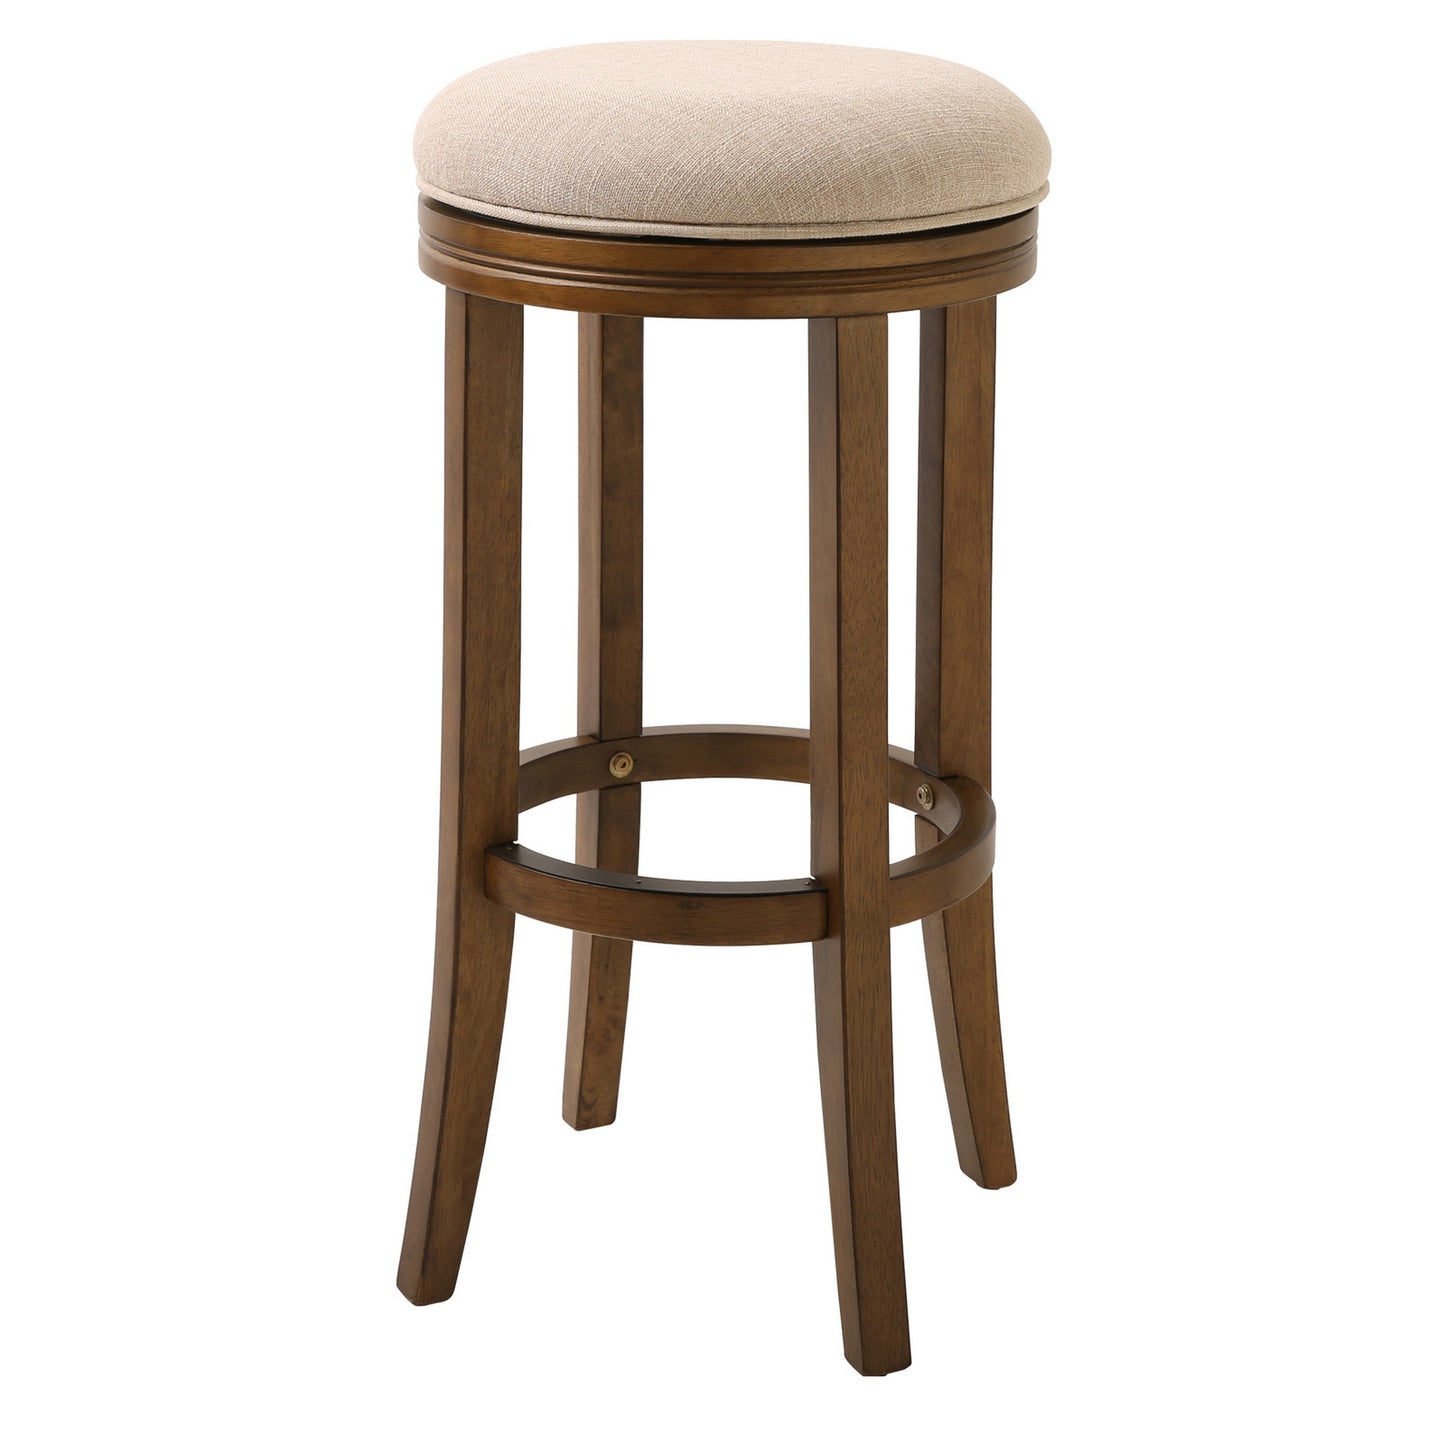 30" Honeysuckle Finished Solid Wood frame with Cream fabric Bar Stool